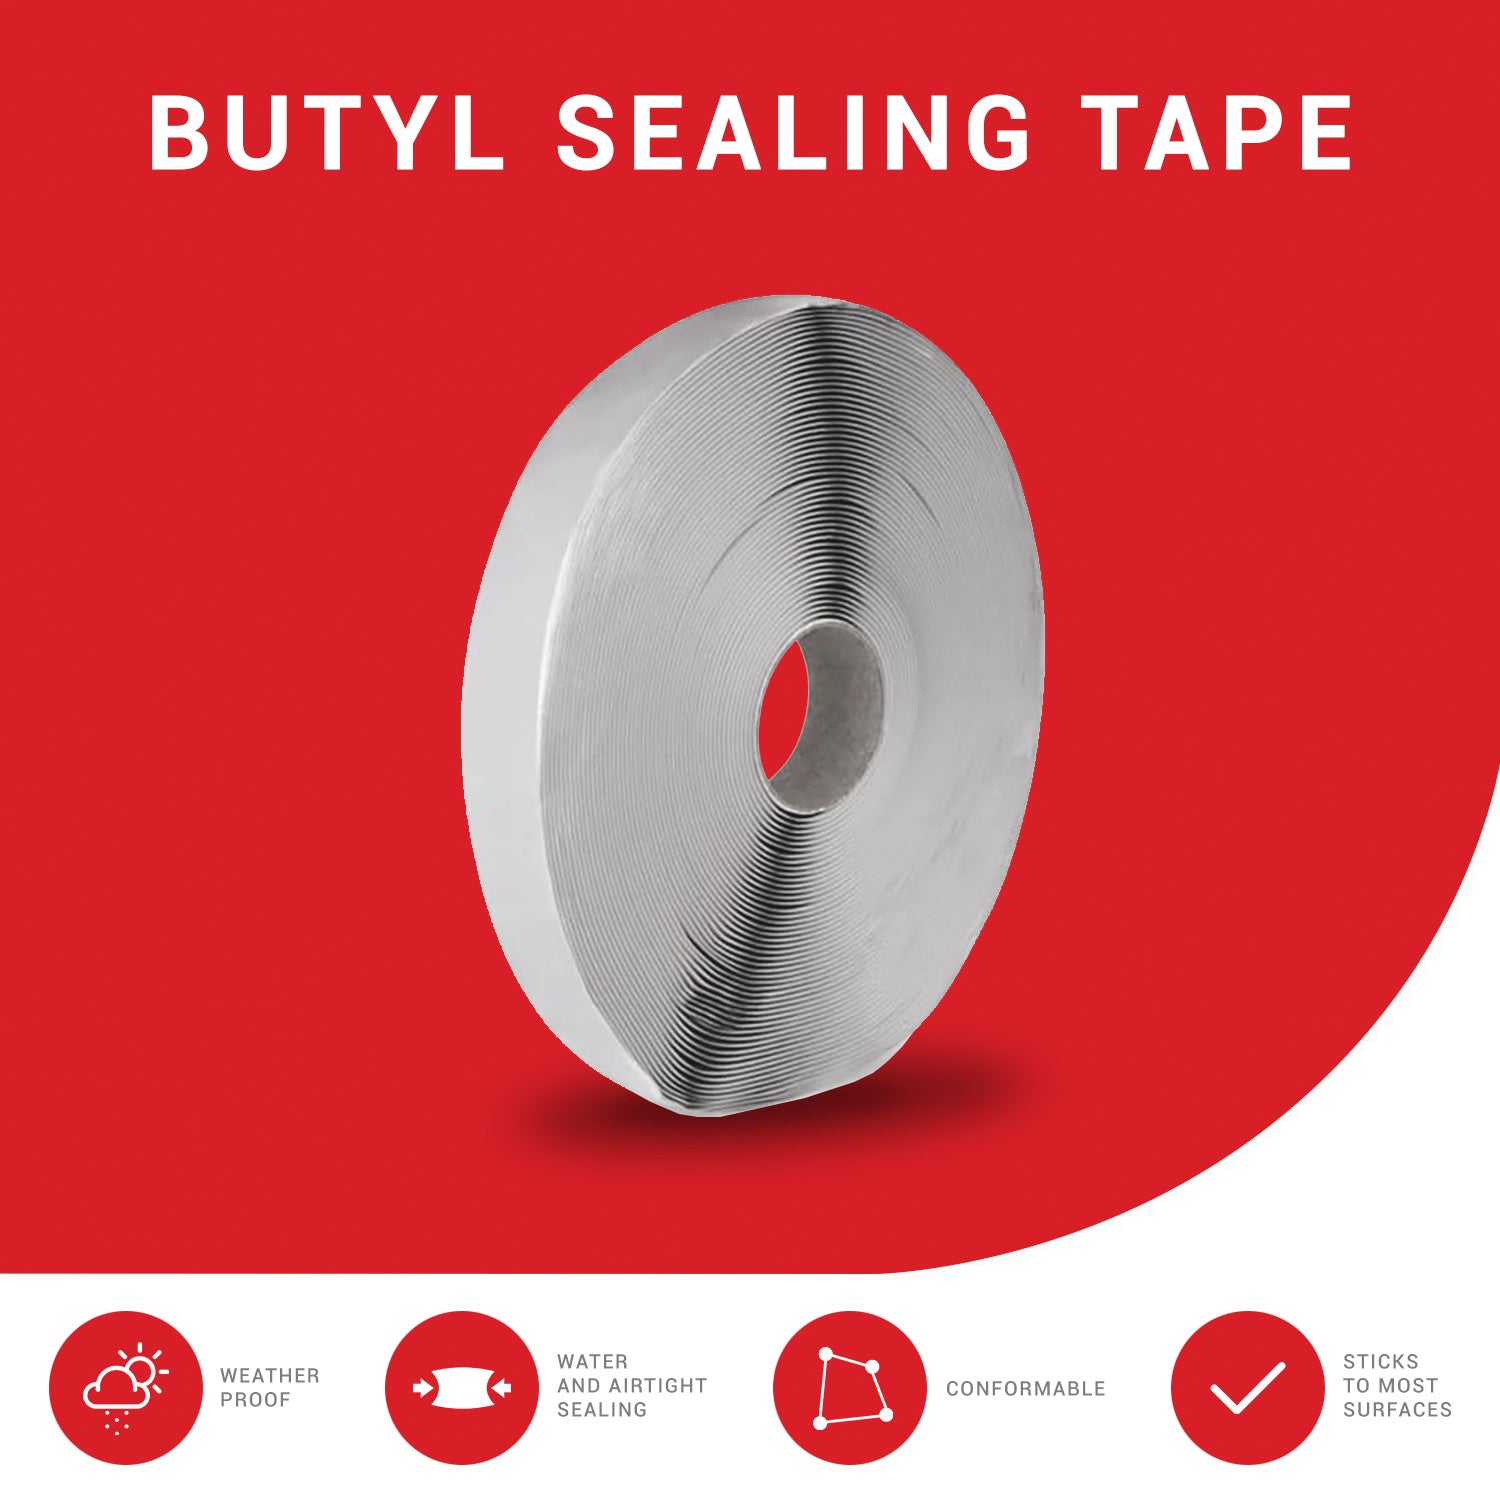 Butyl sealing tape for crawl spaces